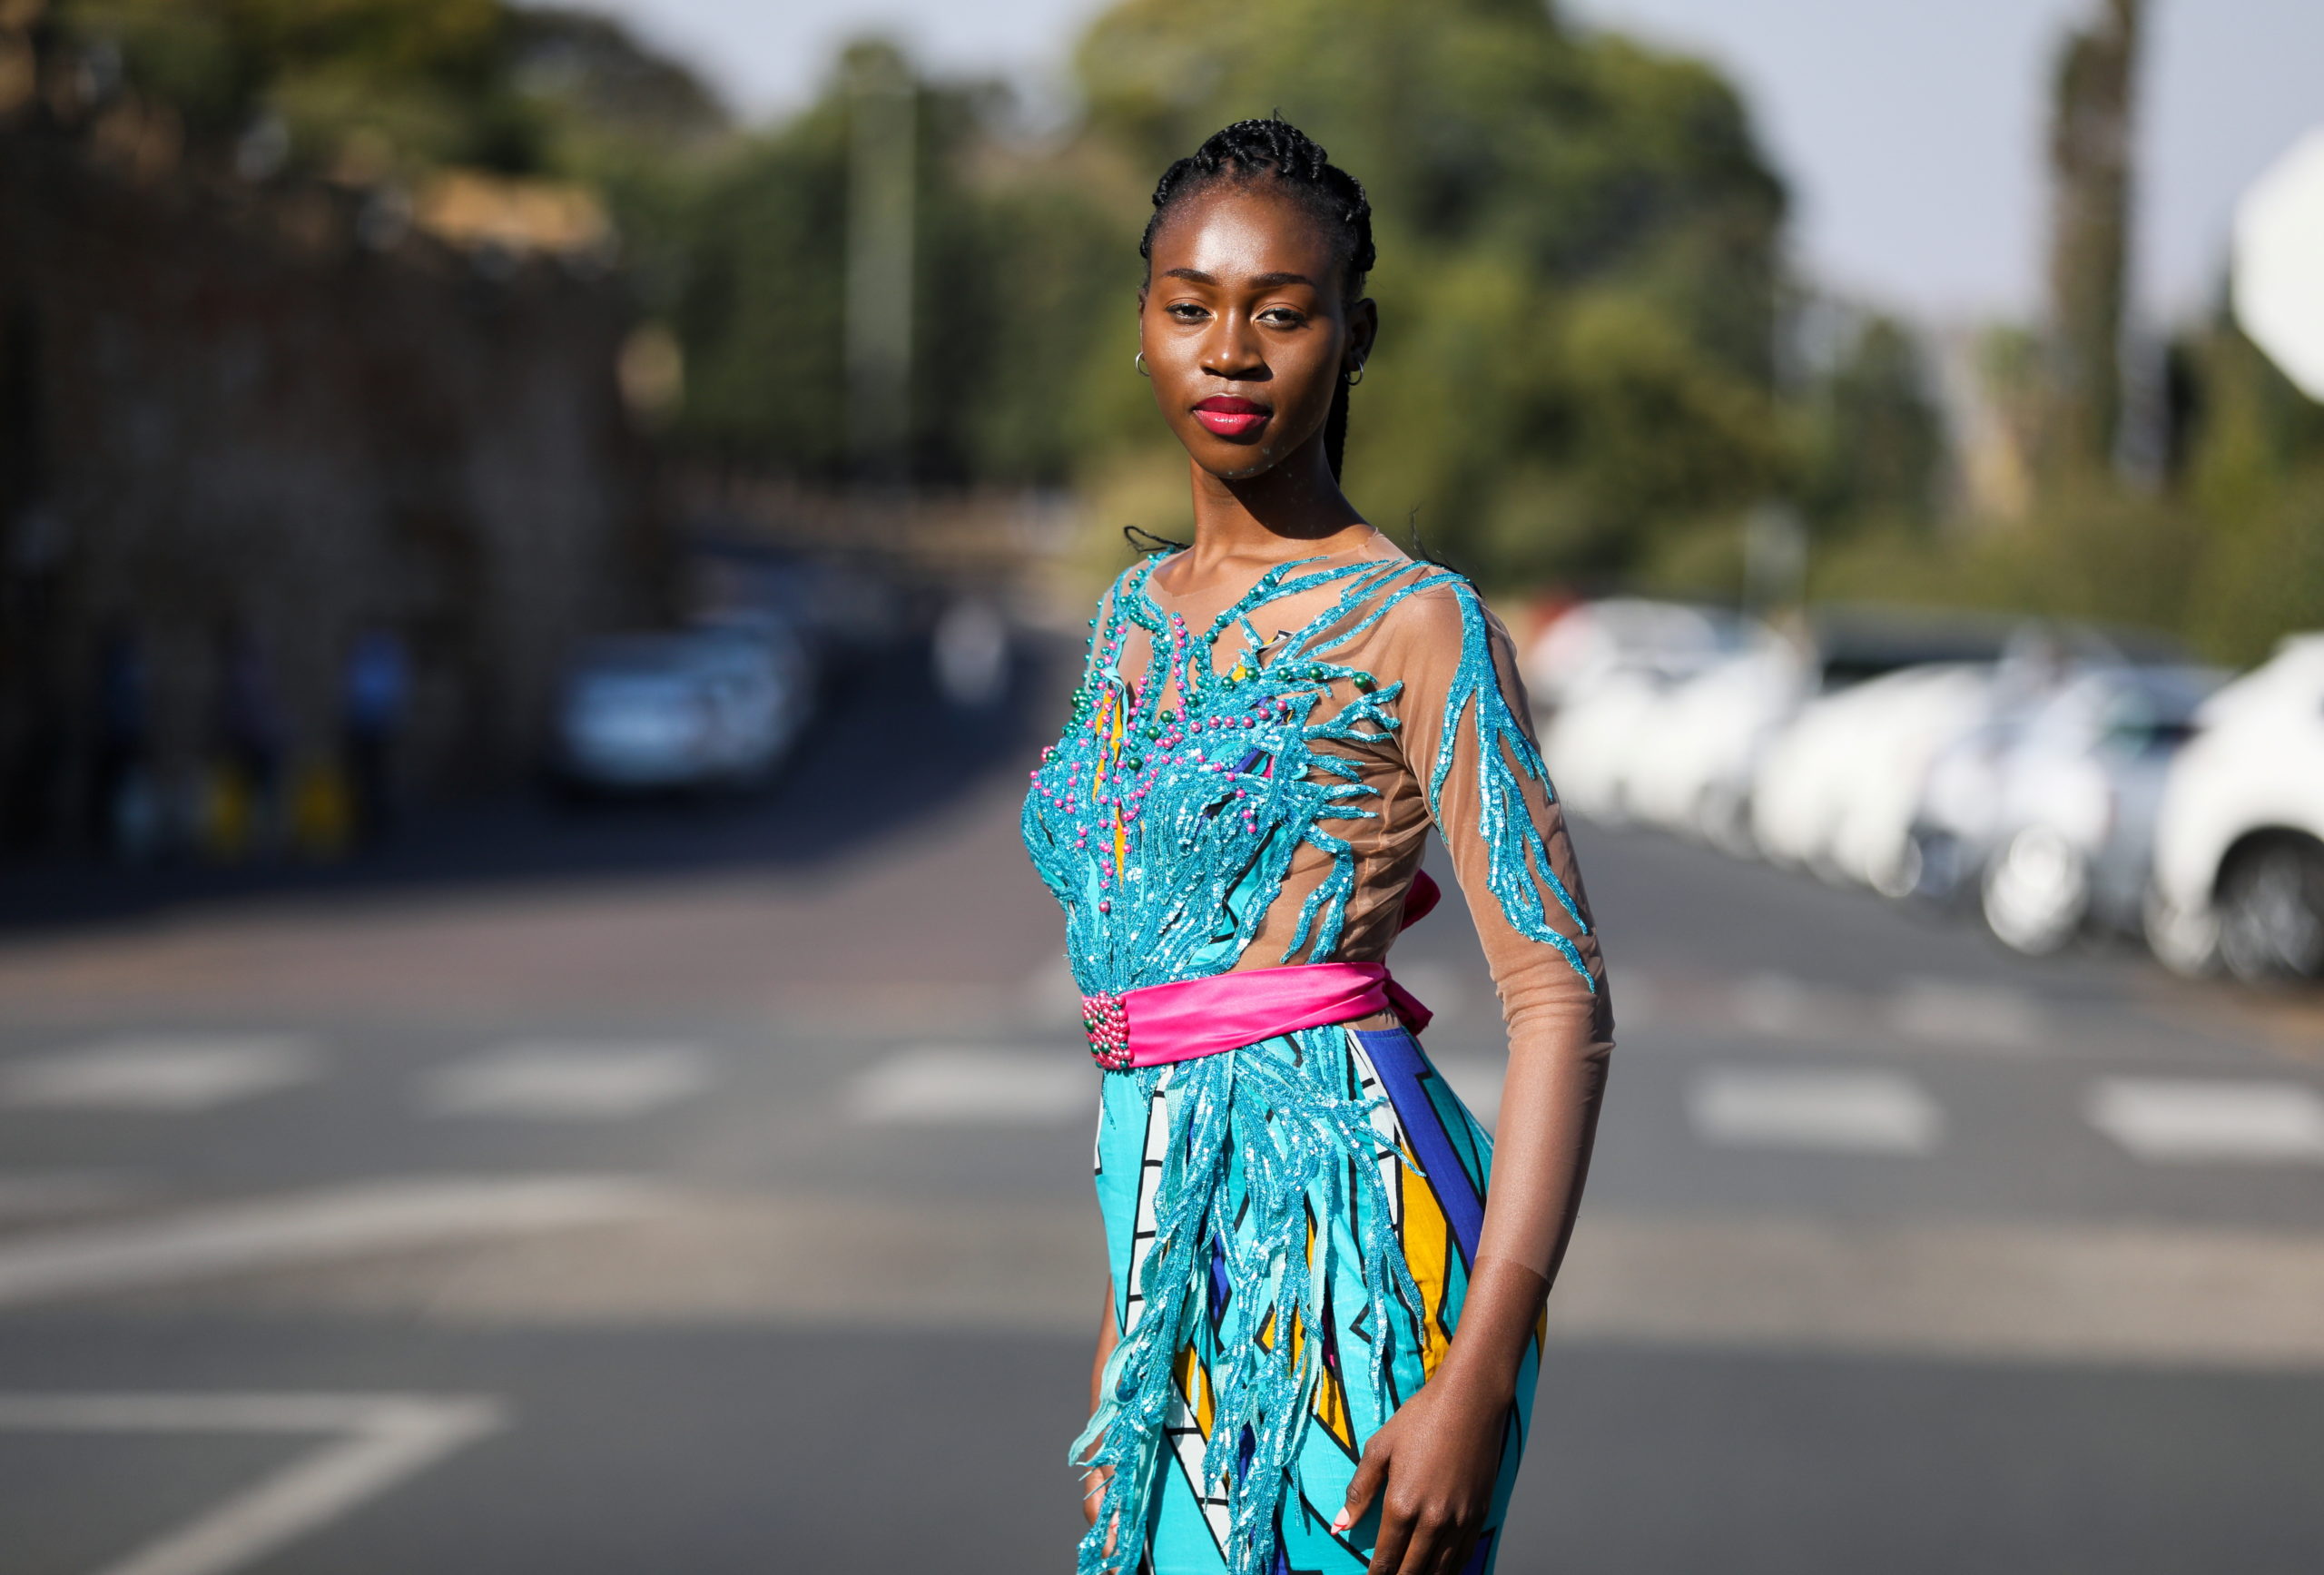 'I'm fighting for my community,' says Miss South Africa's first transgender contestant